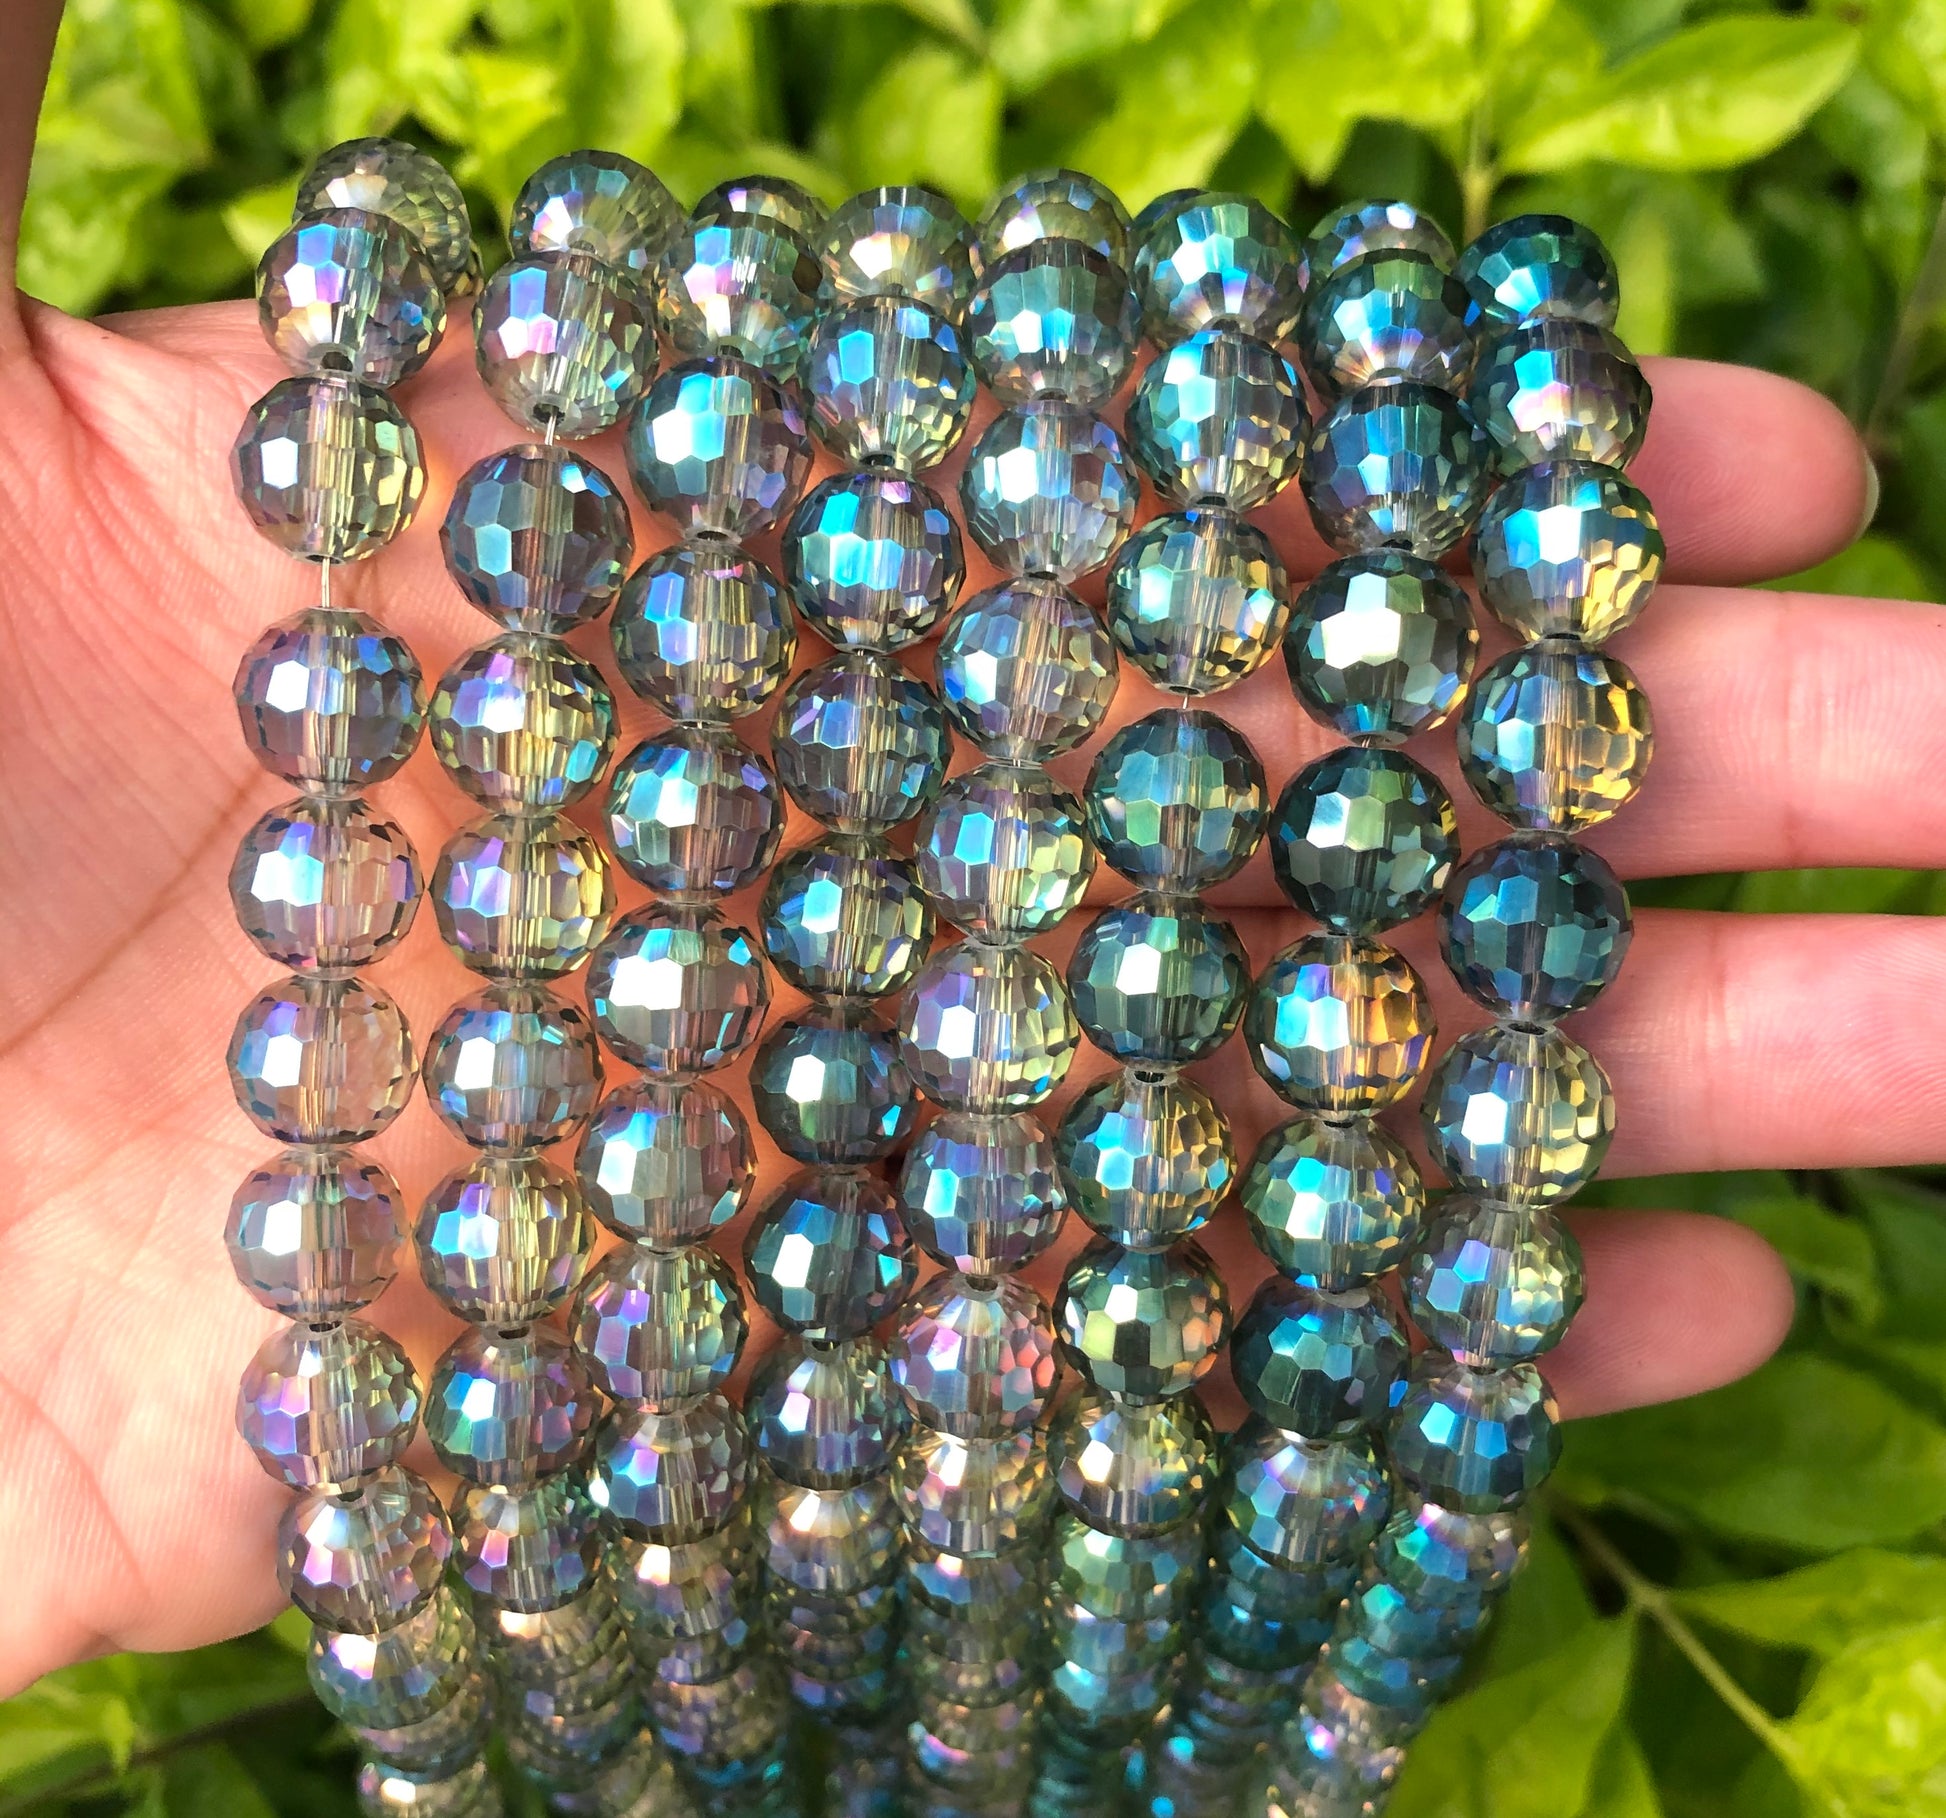 2 Strands/lot 10mm Green AB 96 Faceted Glass Beads Glass Beads Faceted Glass Beads Charms Beads Beyond